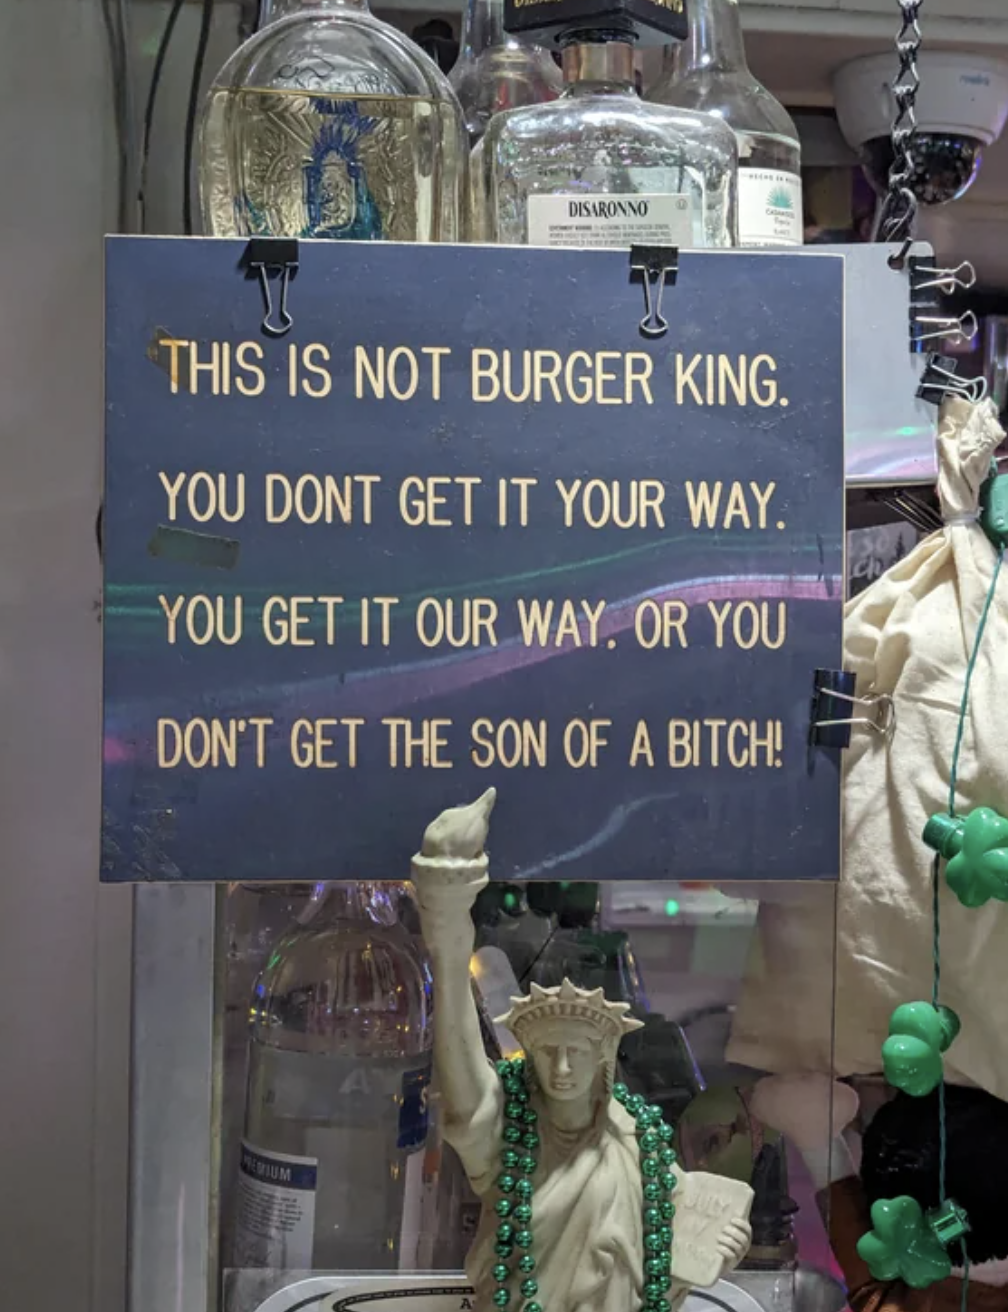 Sign reads &quot;This is not Burger King. You don&#x27;t get it your way. You get it our way or you don&#x27;t get the son of a bitch!&quot; surrounded by bottles and decor